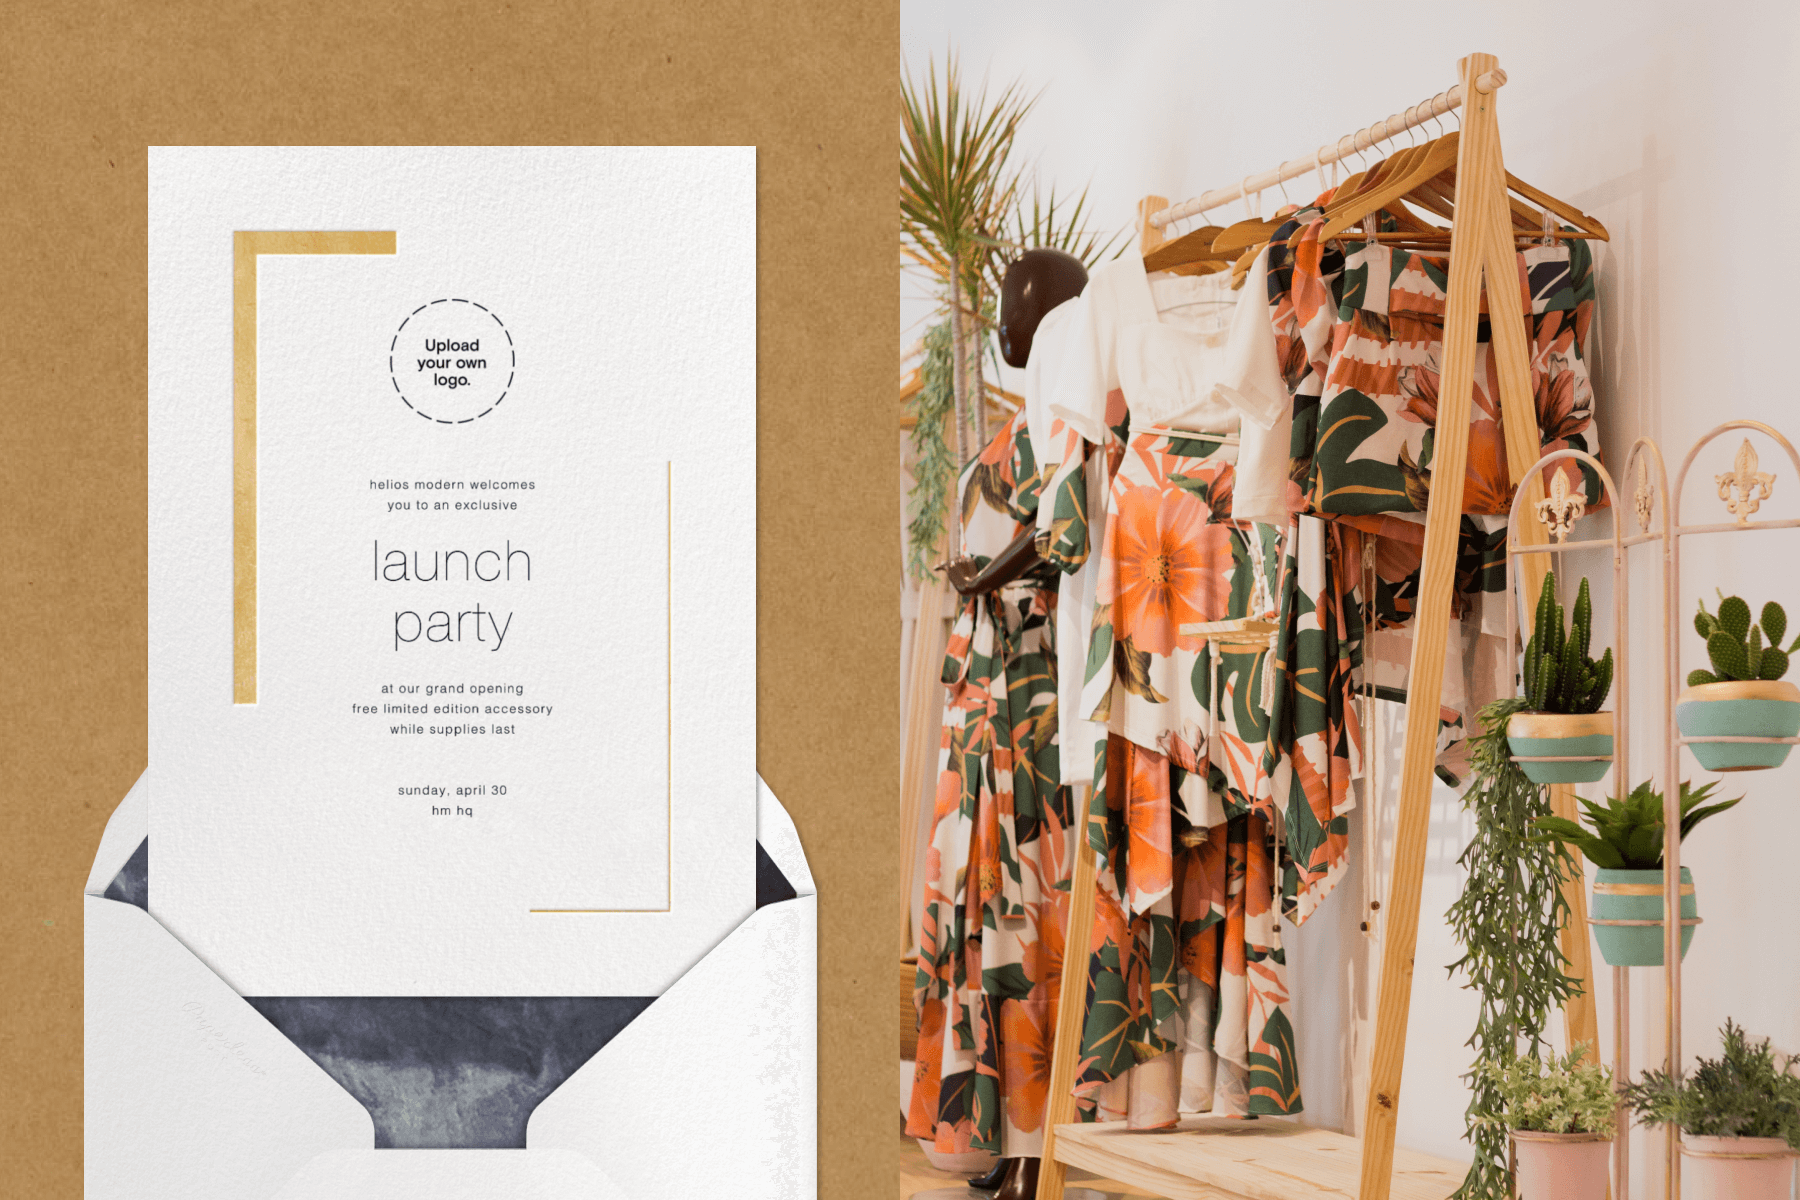 Left: A white and gold invitation with room to add a logo; Right: A rack of clothing with tropical prints.